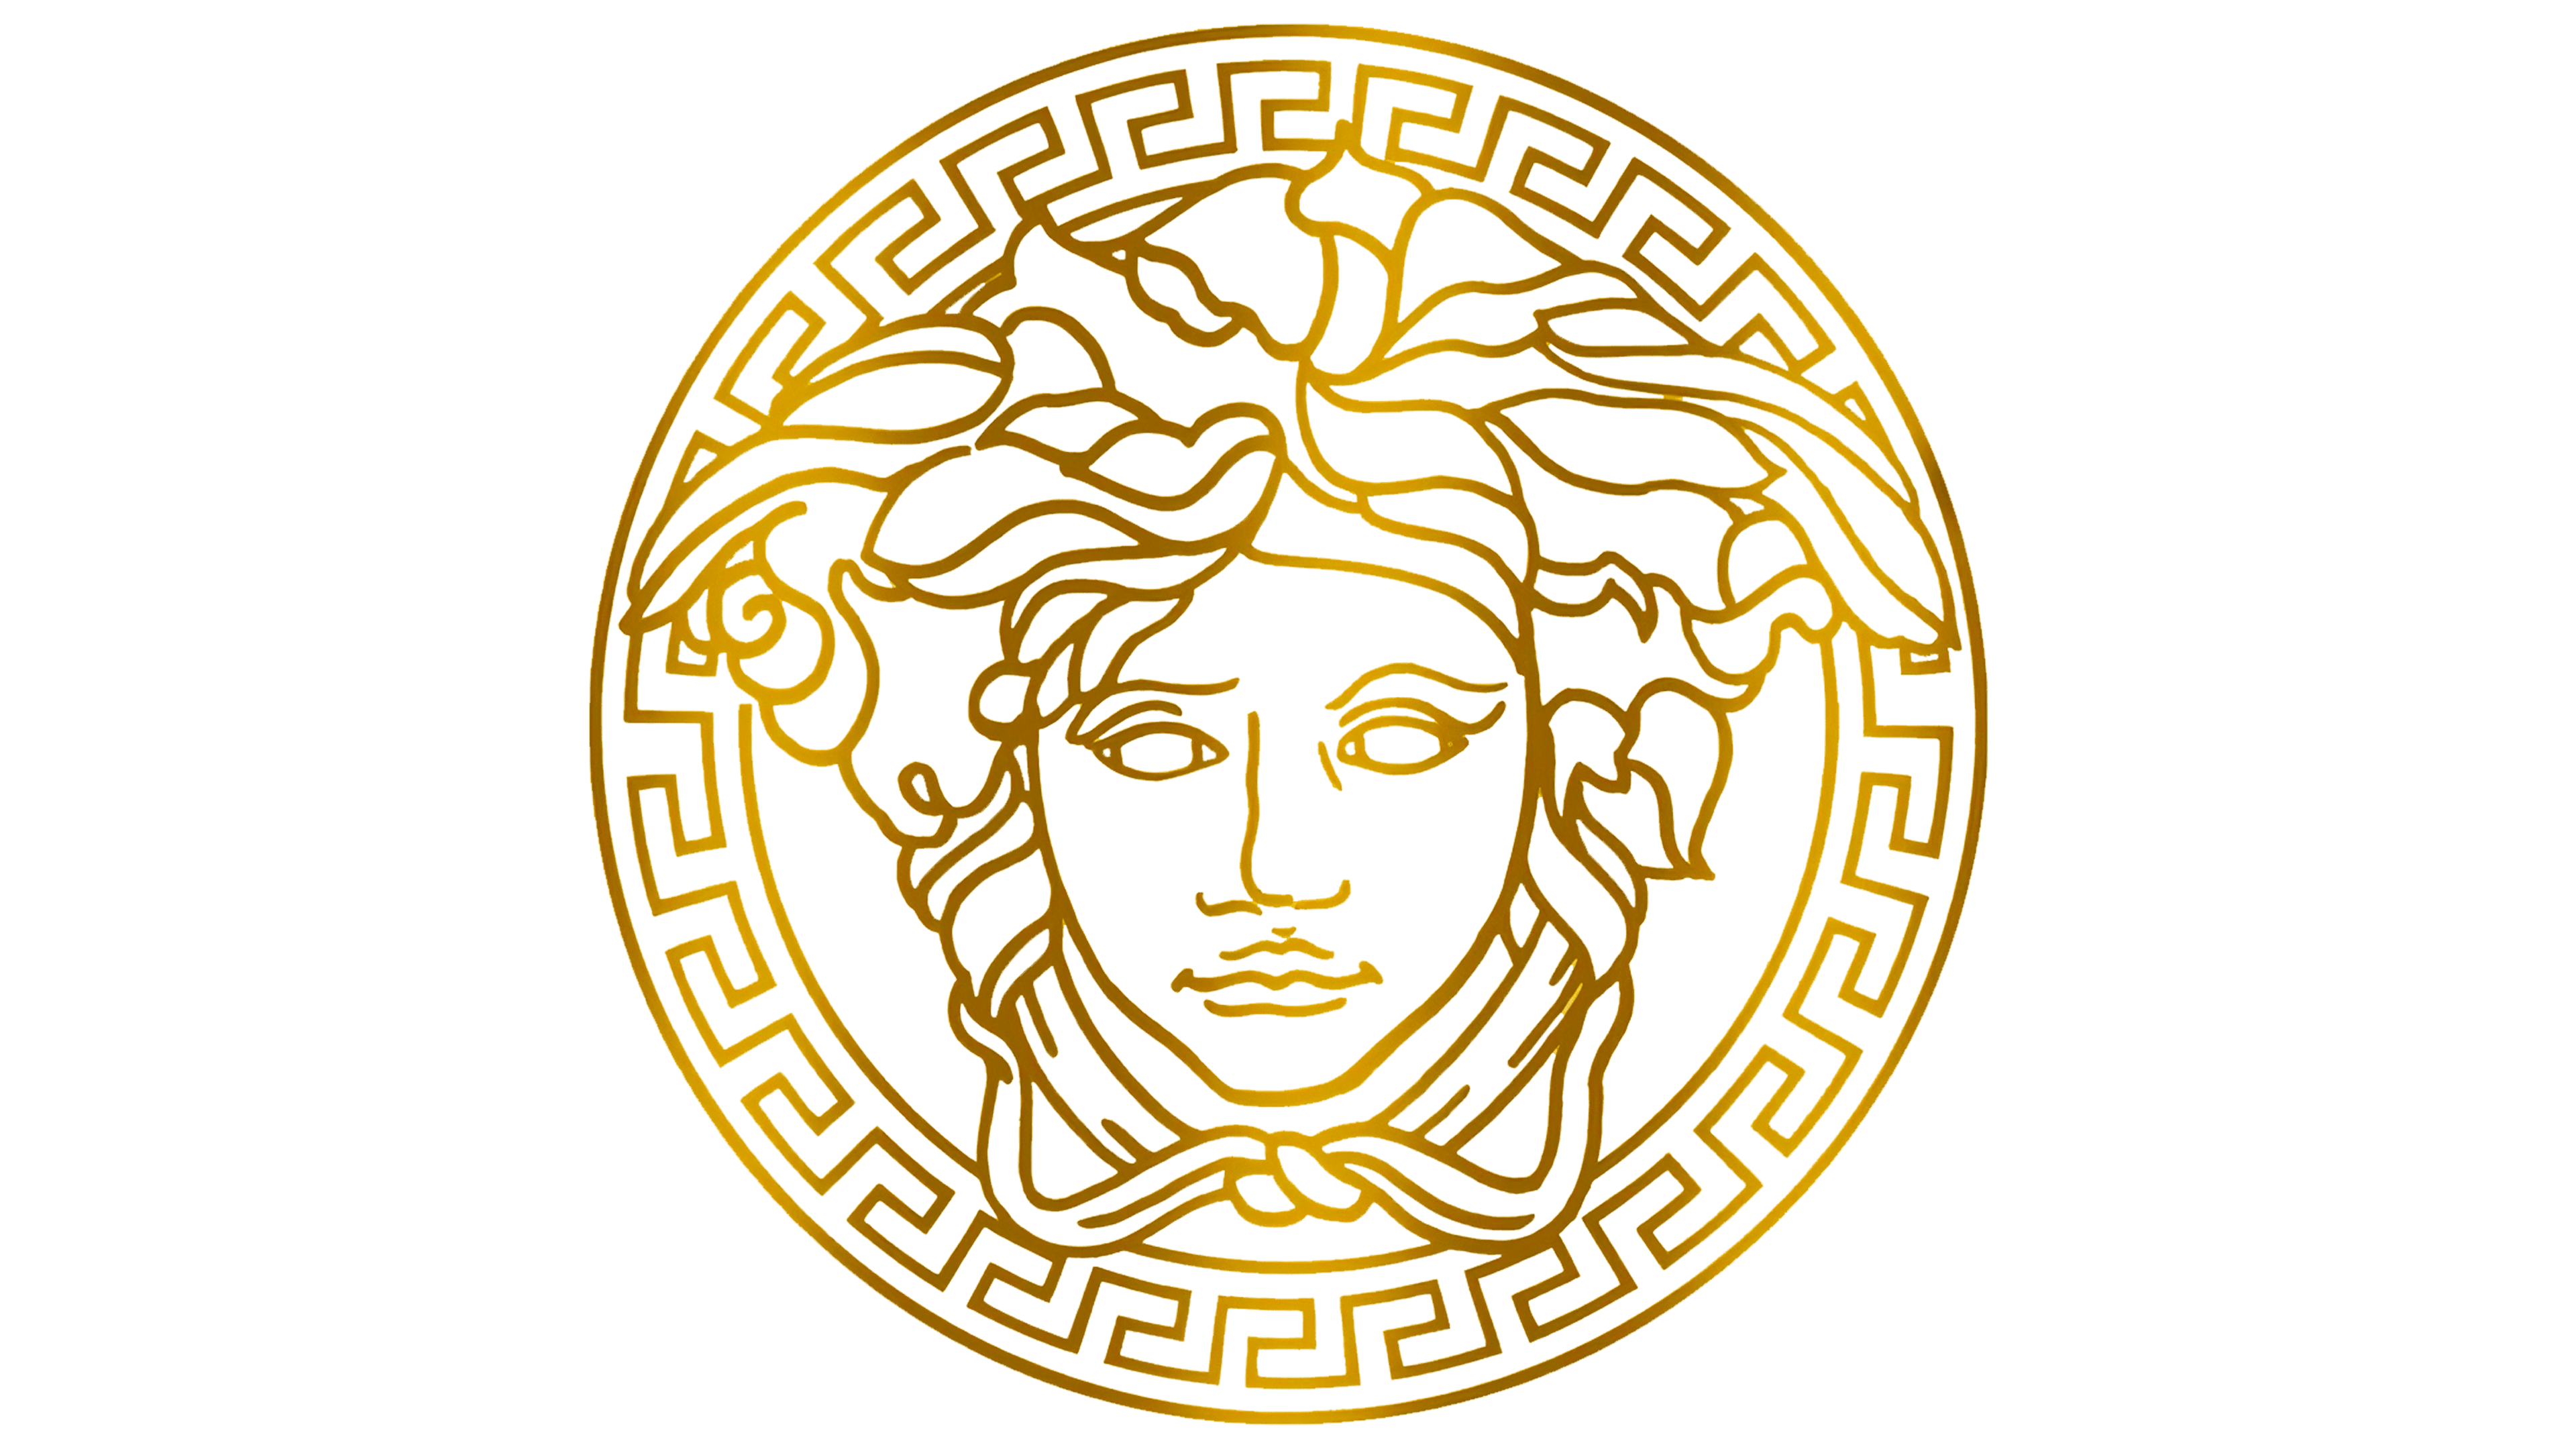 0 Result Images Of Versace Logo Png Hd Png Image Collection